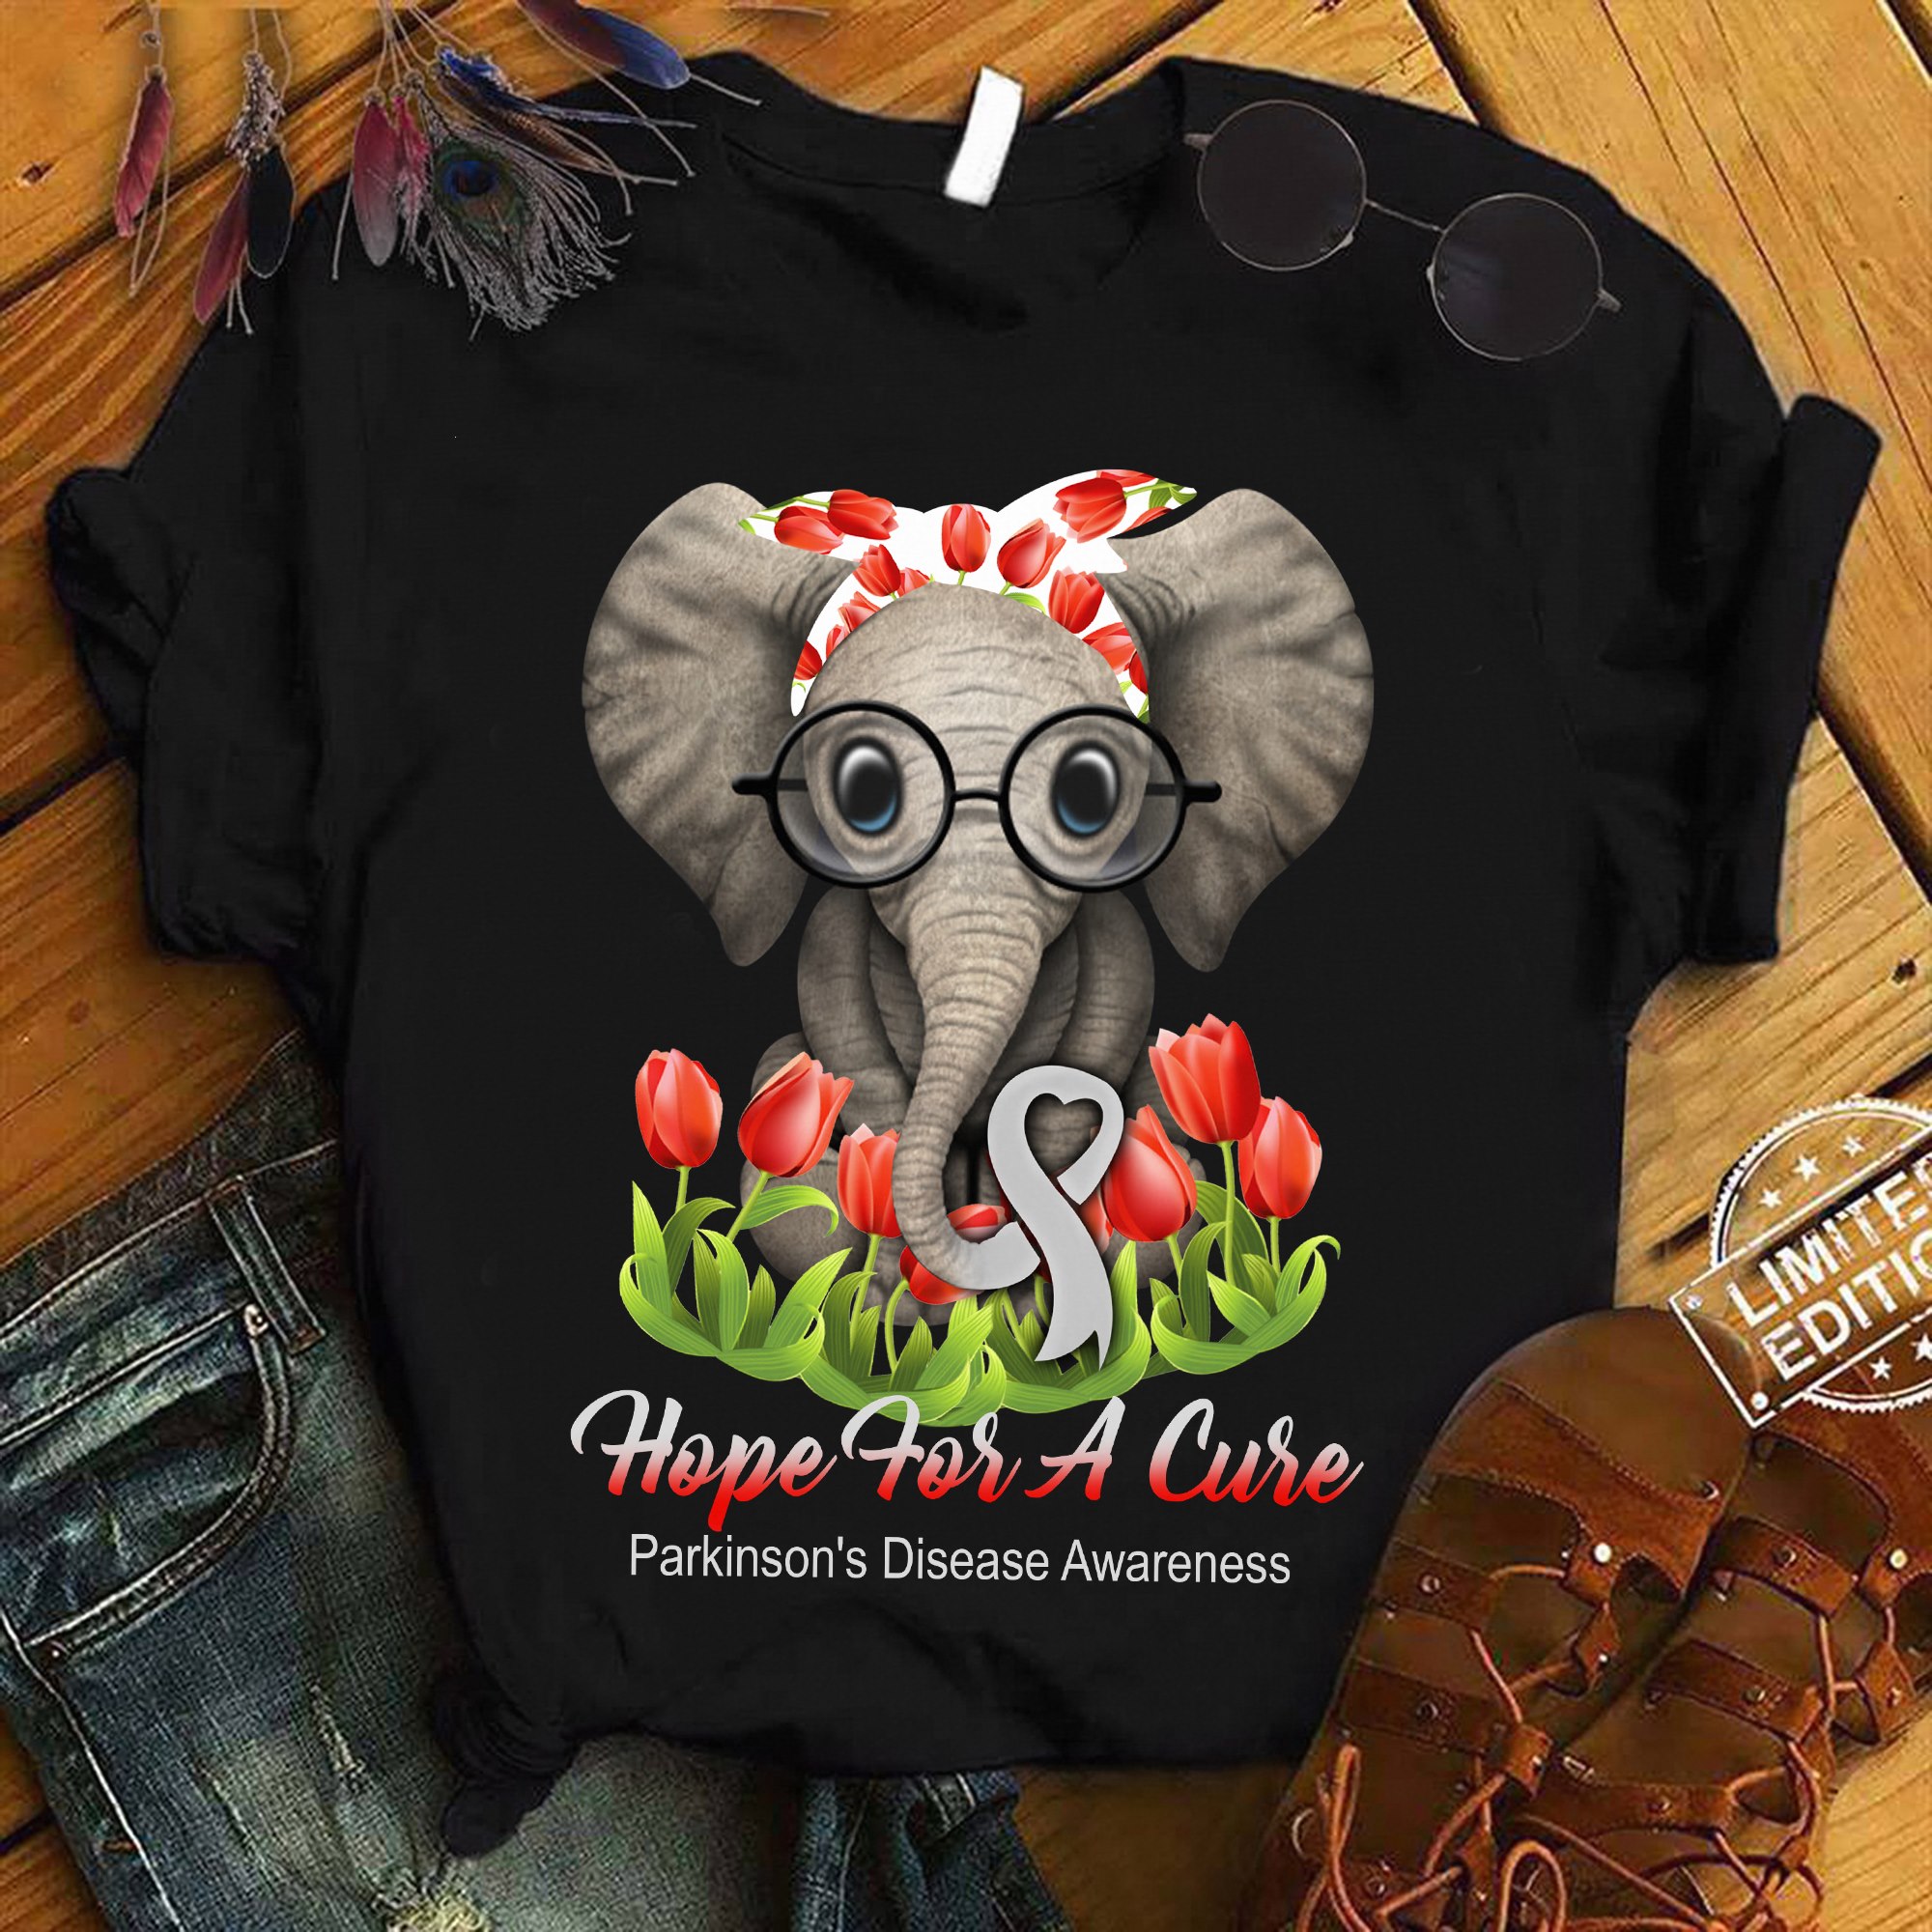 Hope for a cure - Parkinson's disease awareness, elephant lover